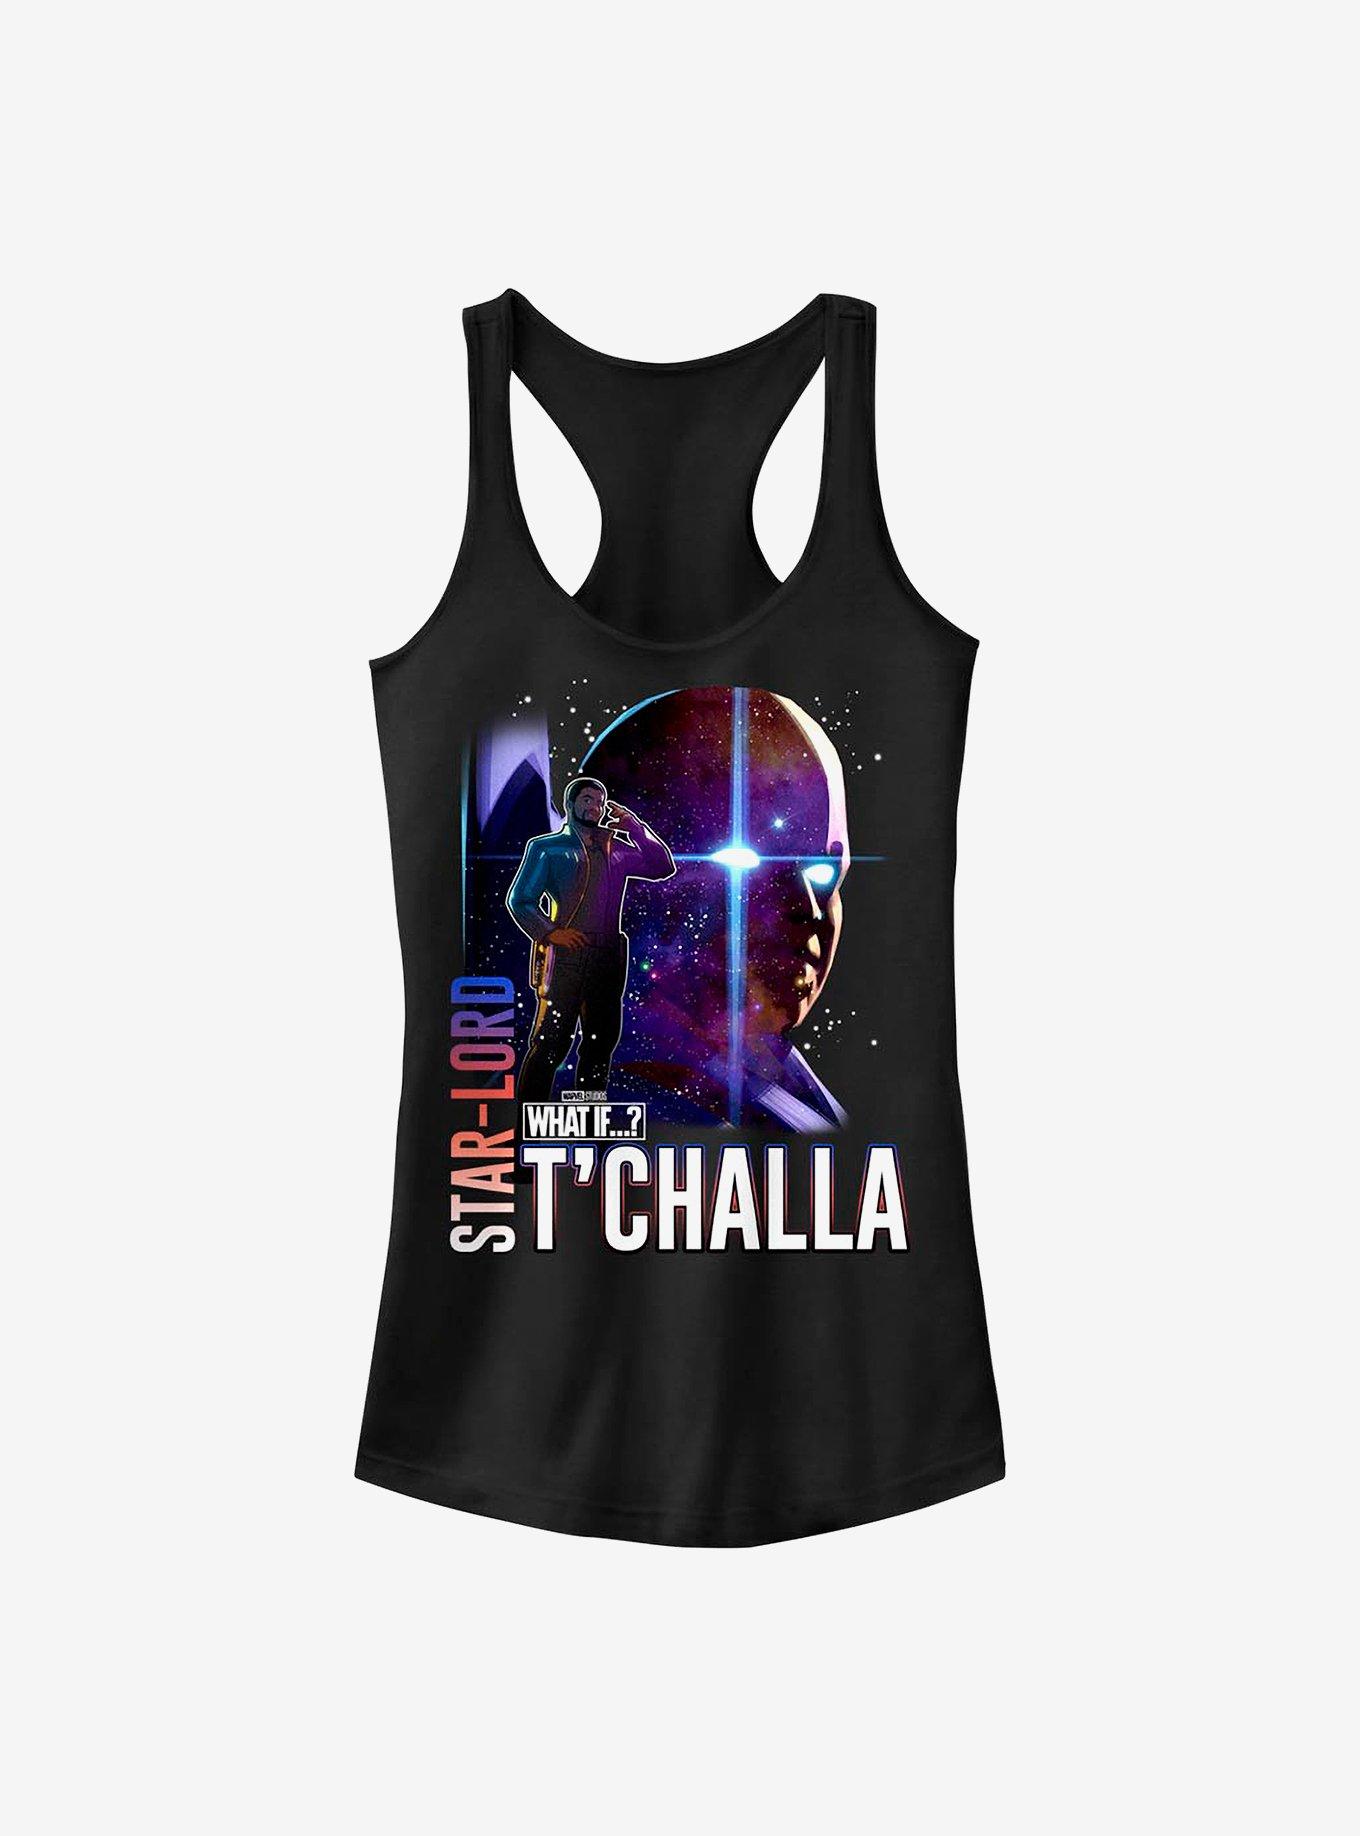 Marvel What If...? Star-Lord Watcher T'Challa Girls Tank, BLACK, hi-res